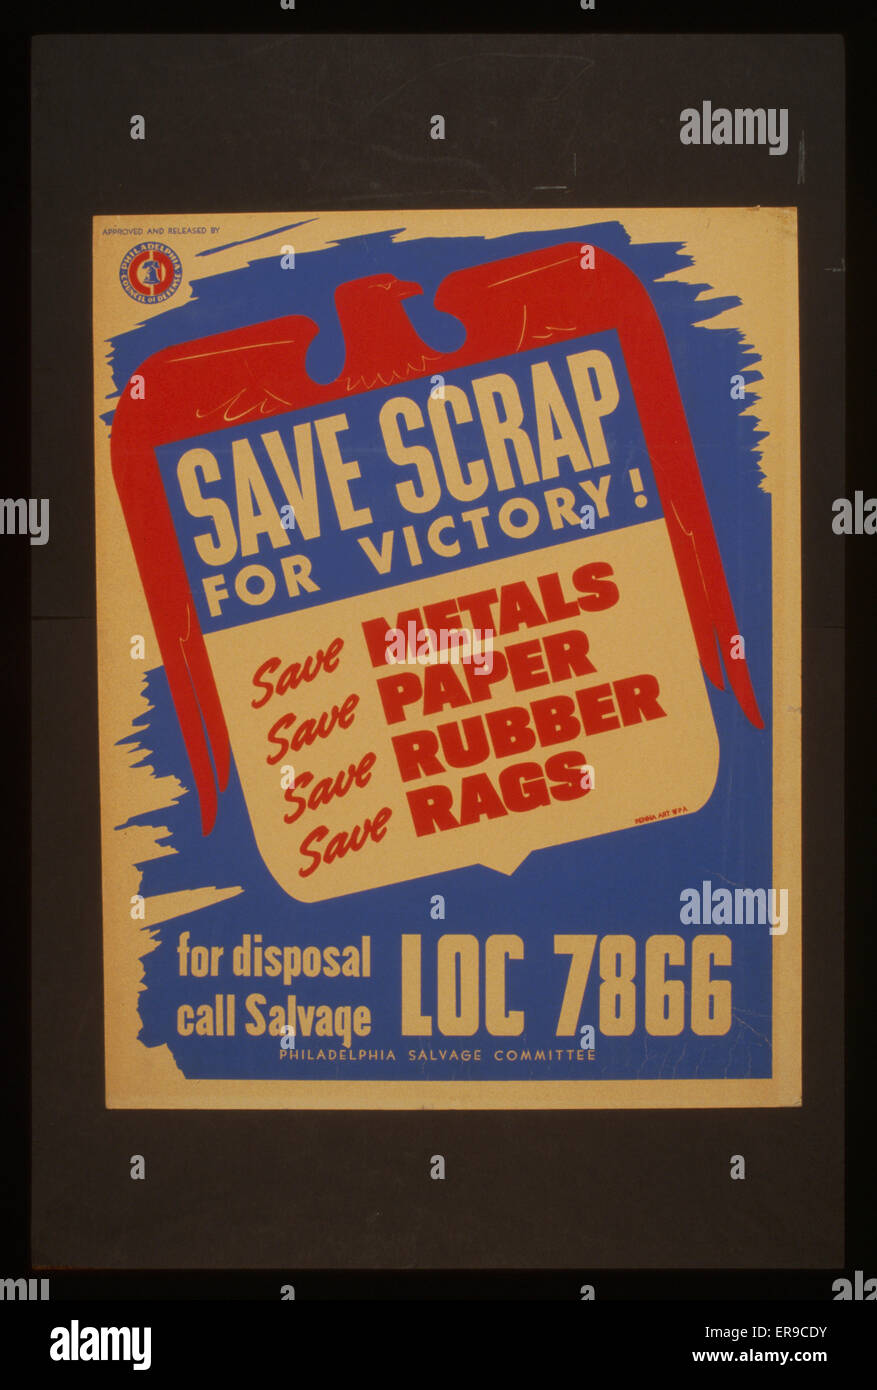 Save scrap for victory! Save metals, save paper, save rubber, save rags. Poster for the Philadelphia Salvage Committee encouraging scrap drives to aid the war effort. Date between 1941 and 1943. Stock Photo